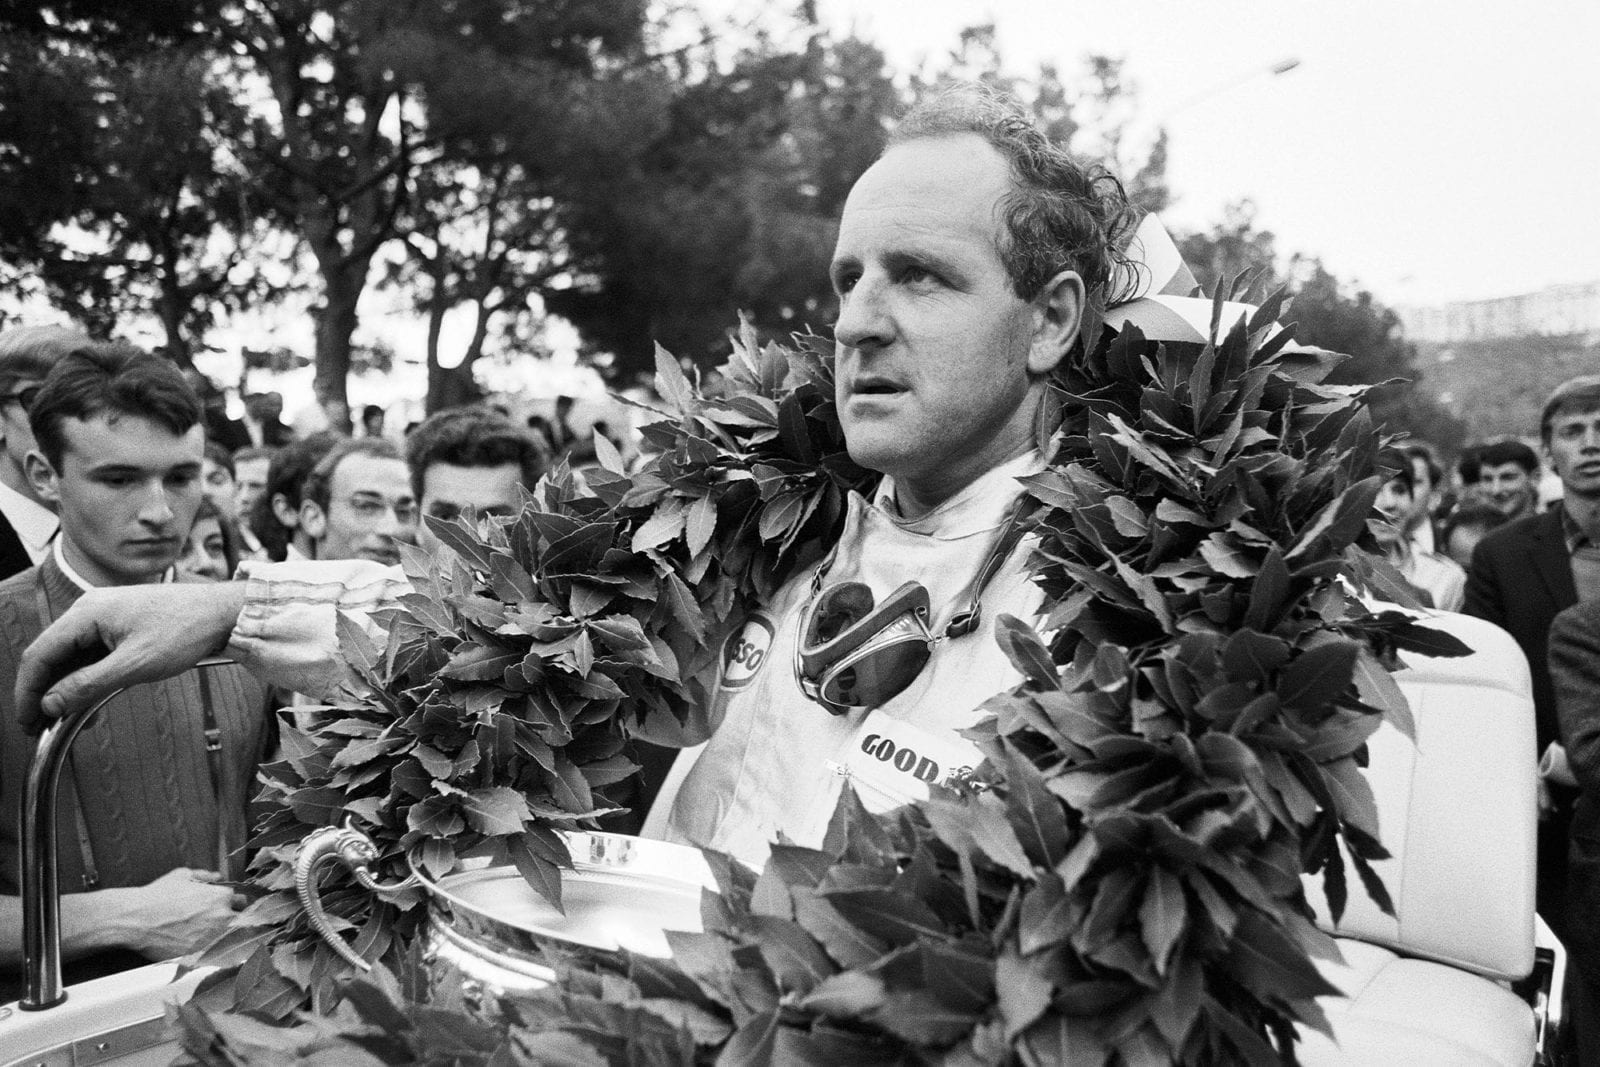 Denny Hulme with the Monaco GP winner's wreath and trophy.